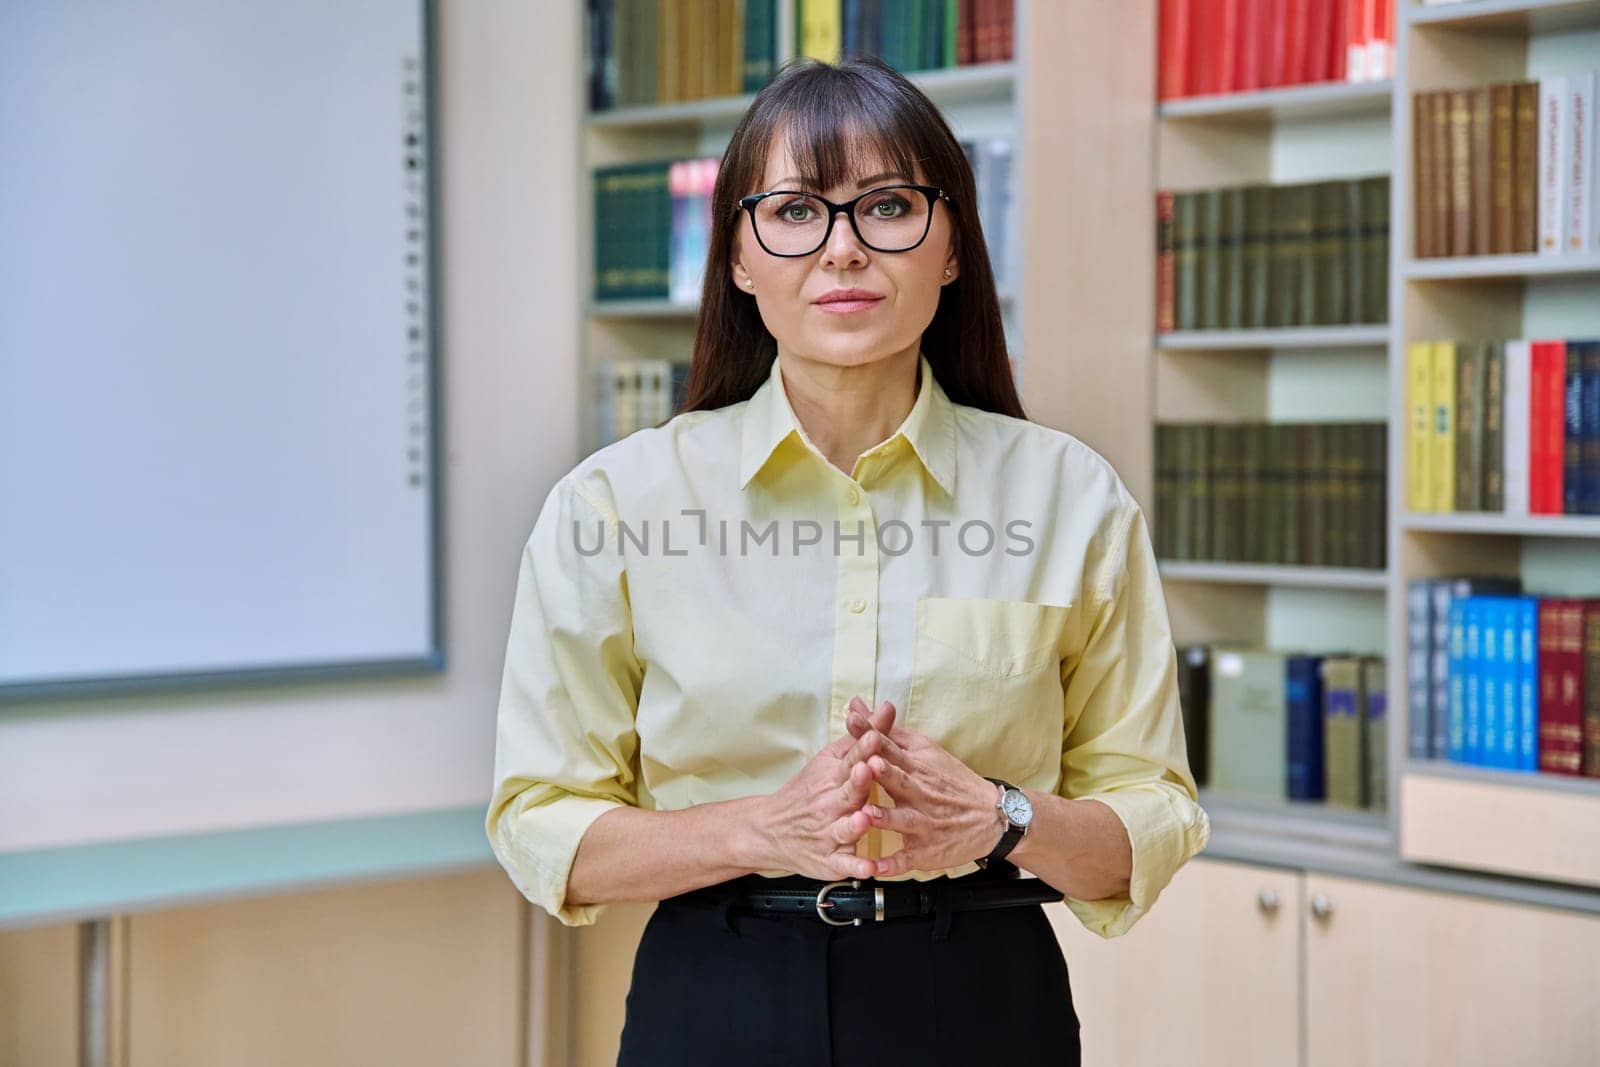 Portrait of confident mature business woman in library. Middle-aged elegant female with folded hands, manager teacher mentor psychologist counselor librarian advisor background of shelves with books